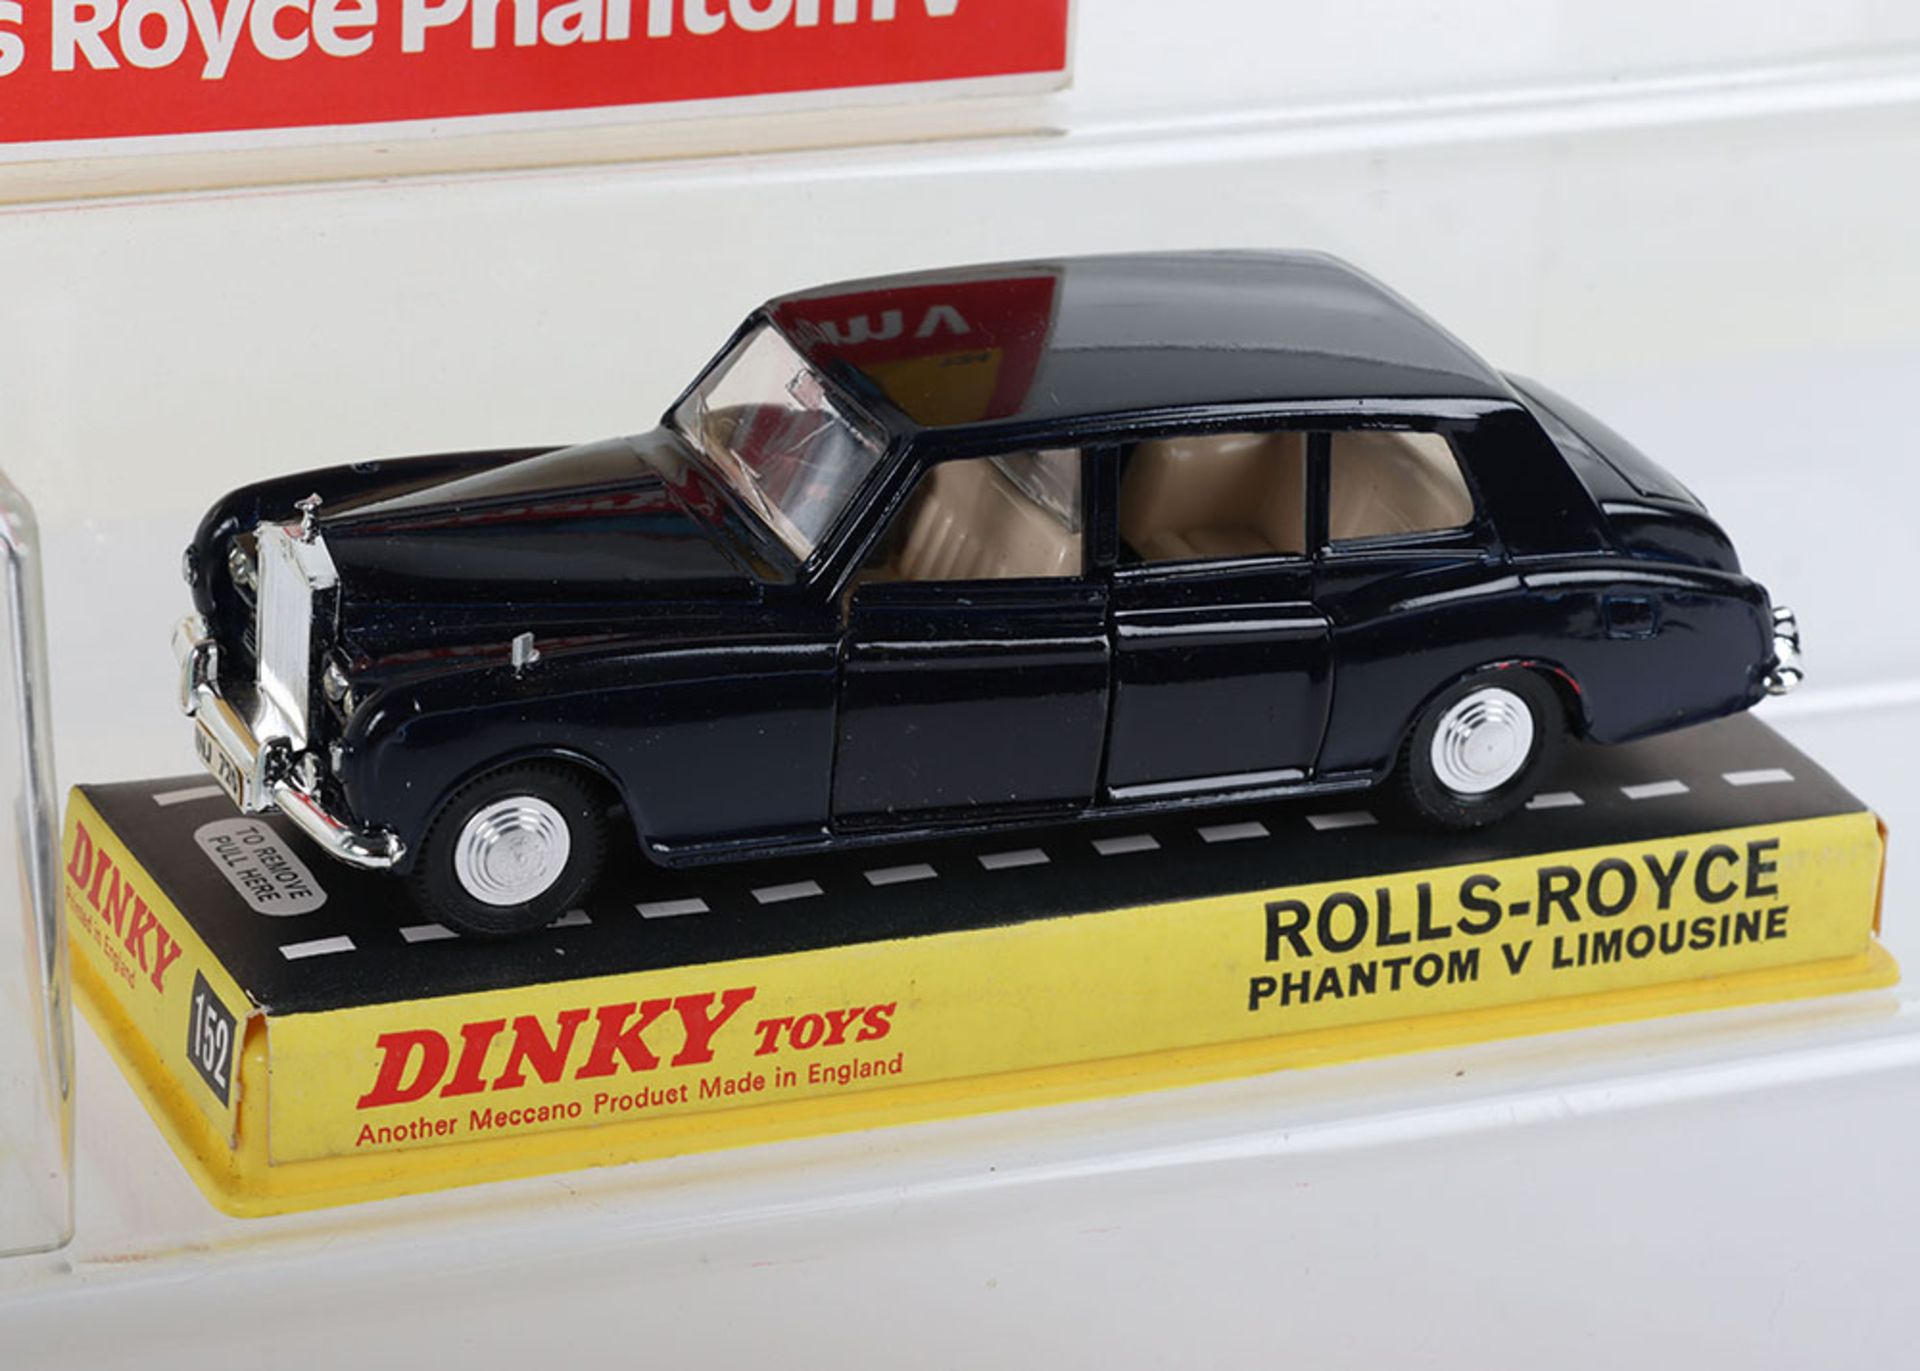 Two Dinky Toys Rolls Royce Phantom V Limousines - Image 2 of 6